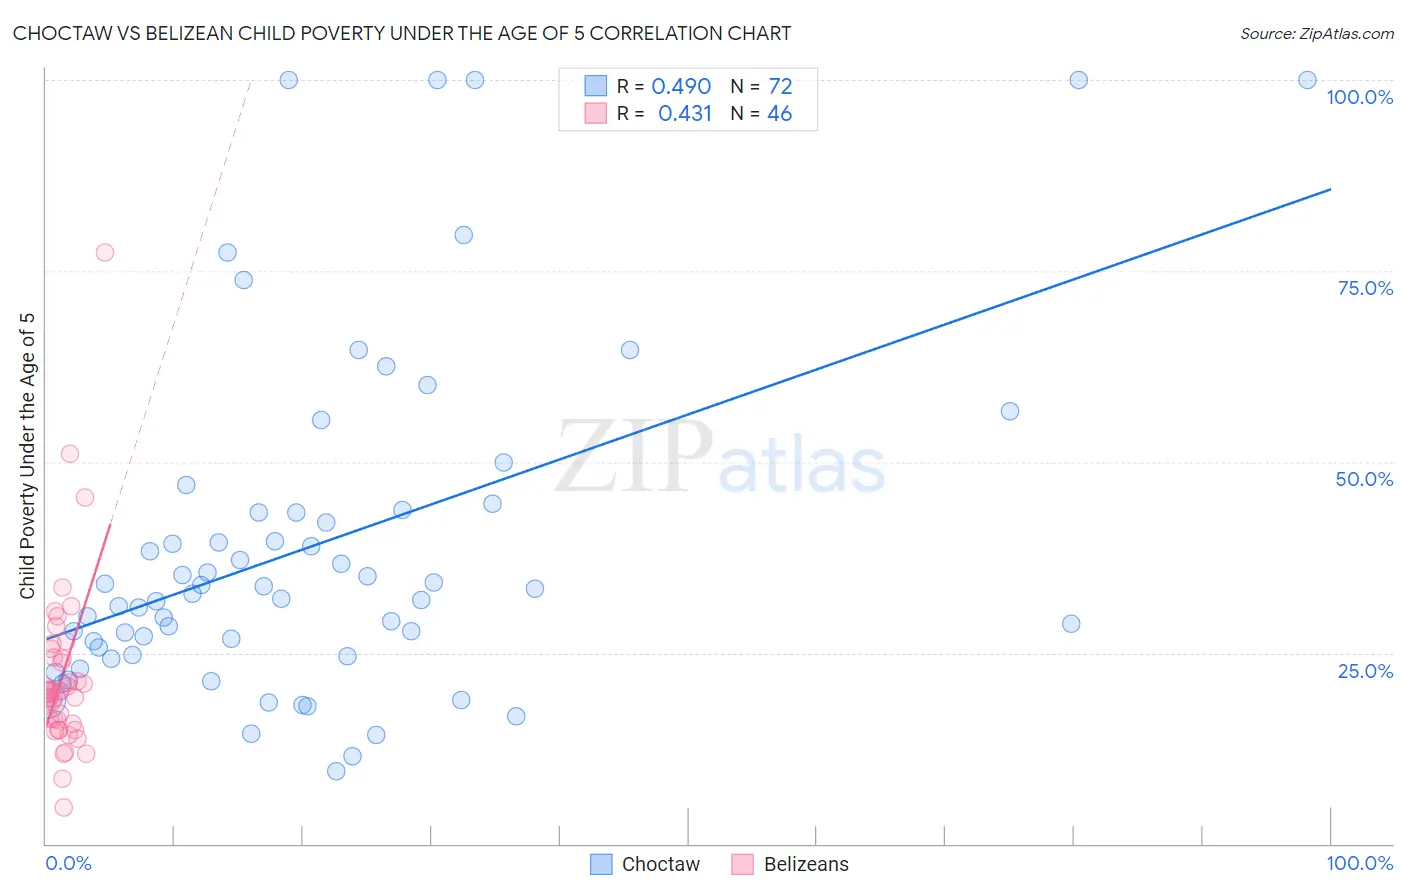 Choctaw vs Belizean Child Poverty Under the Age of 5